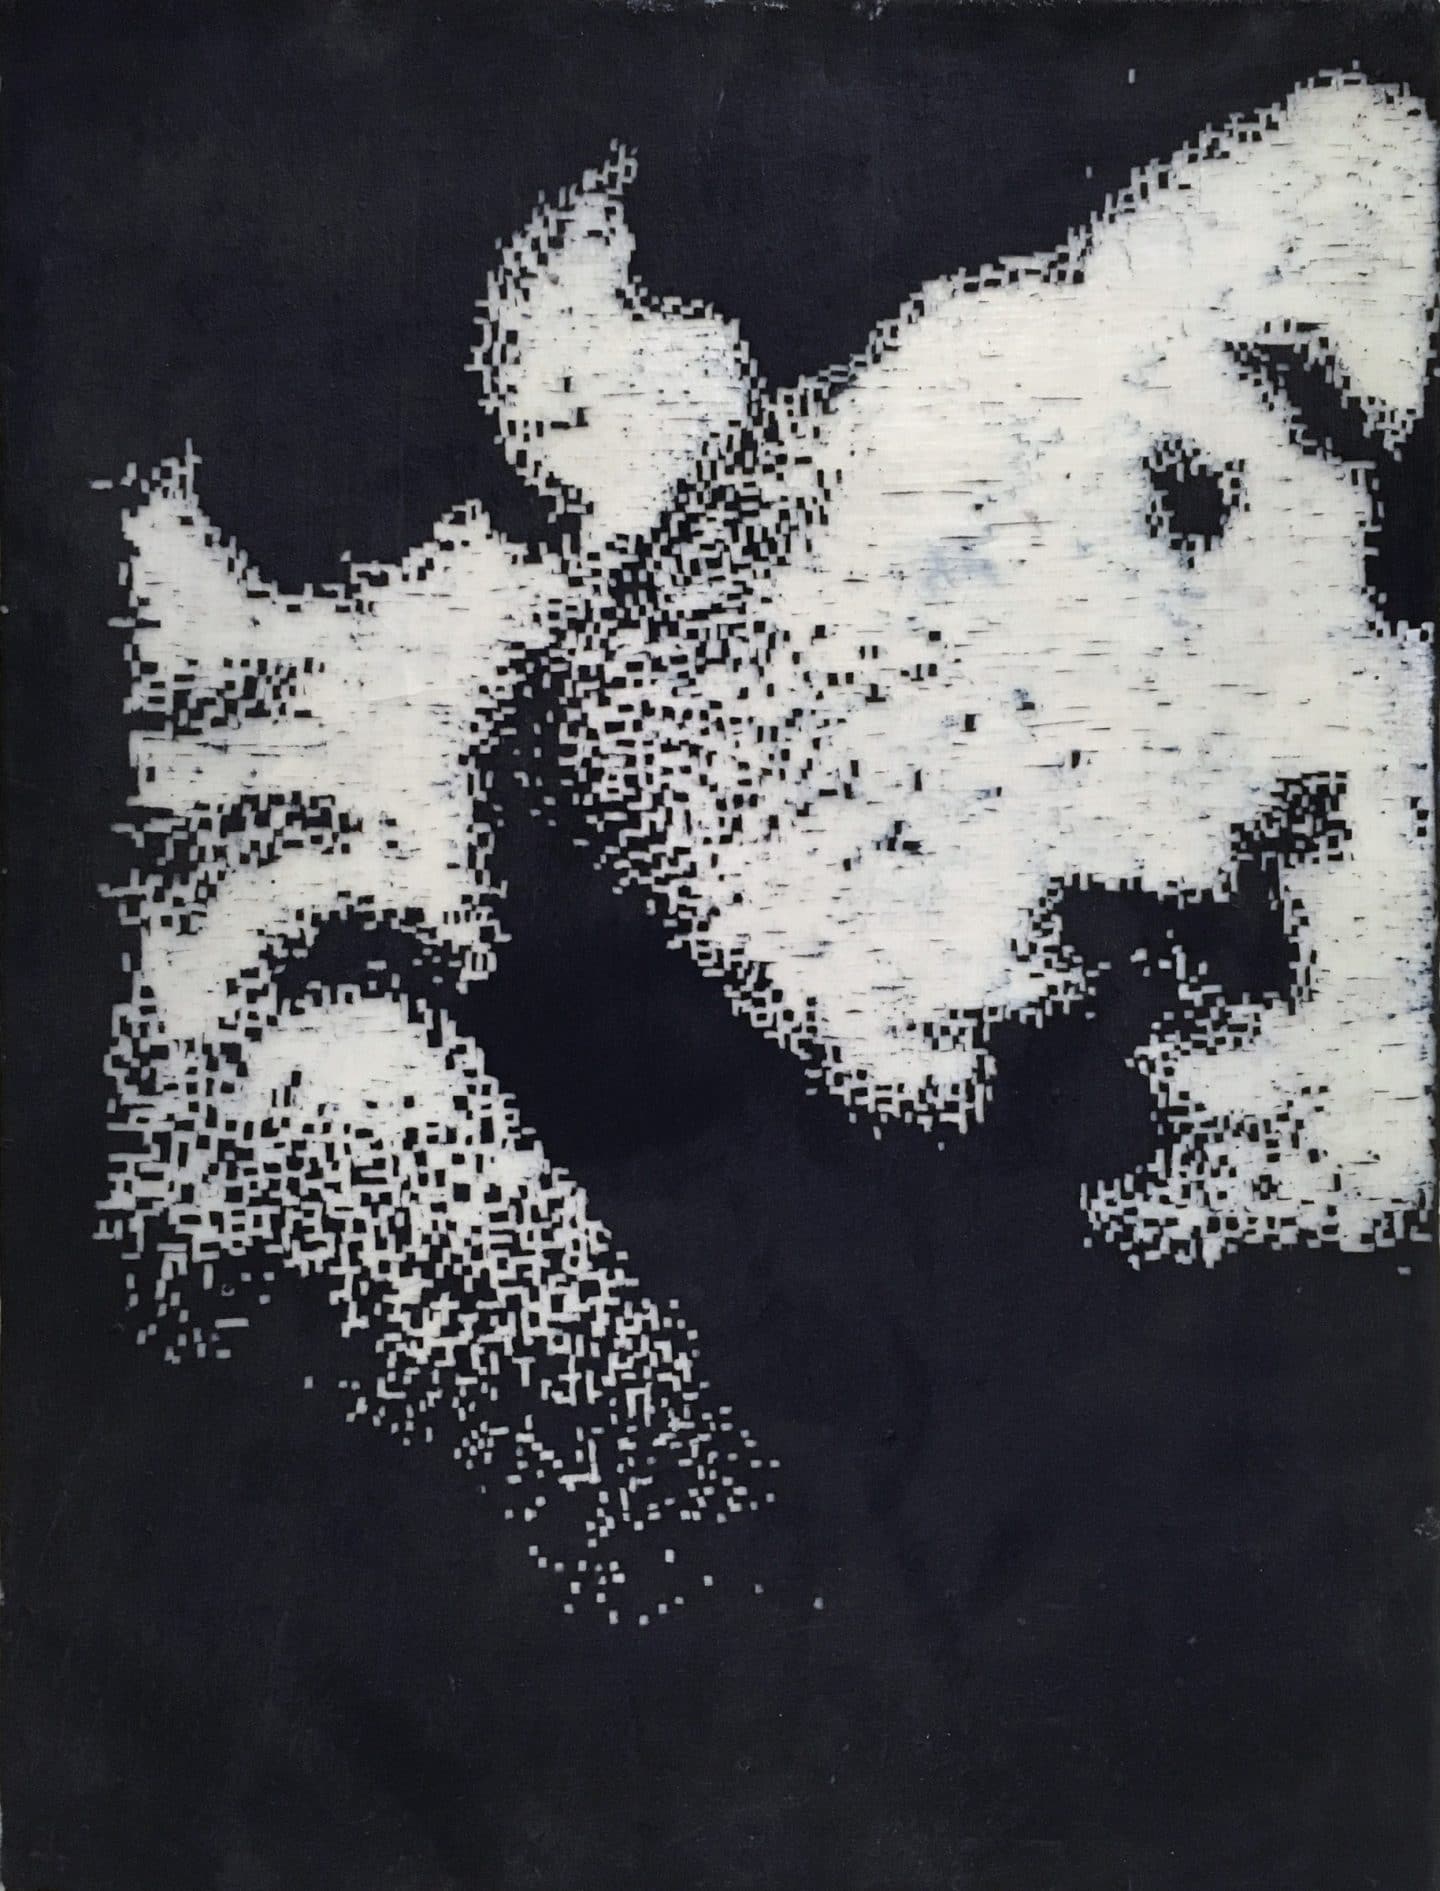 Stephen Andrews, Quick, 1992, encaustic, pigment and ink on canvas. Gift of Herbert O. Bunt, 1996 (39-052)